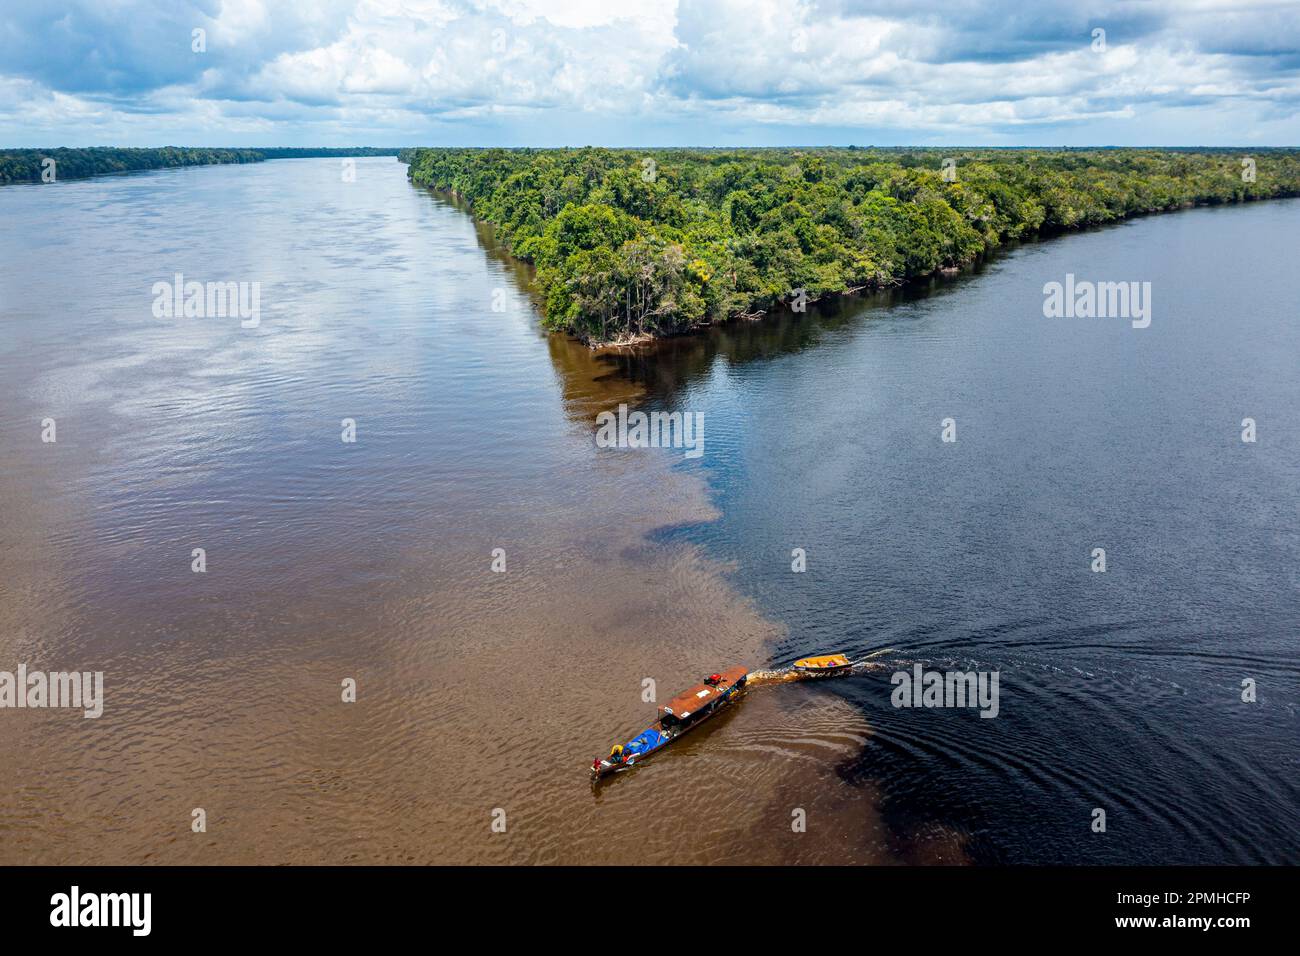 Little boat on the meeting point of the Casiquiare River and black Pasimoni River, in the deep south of Venezuela, South America Stock Photo